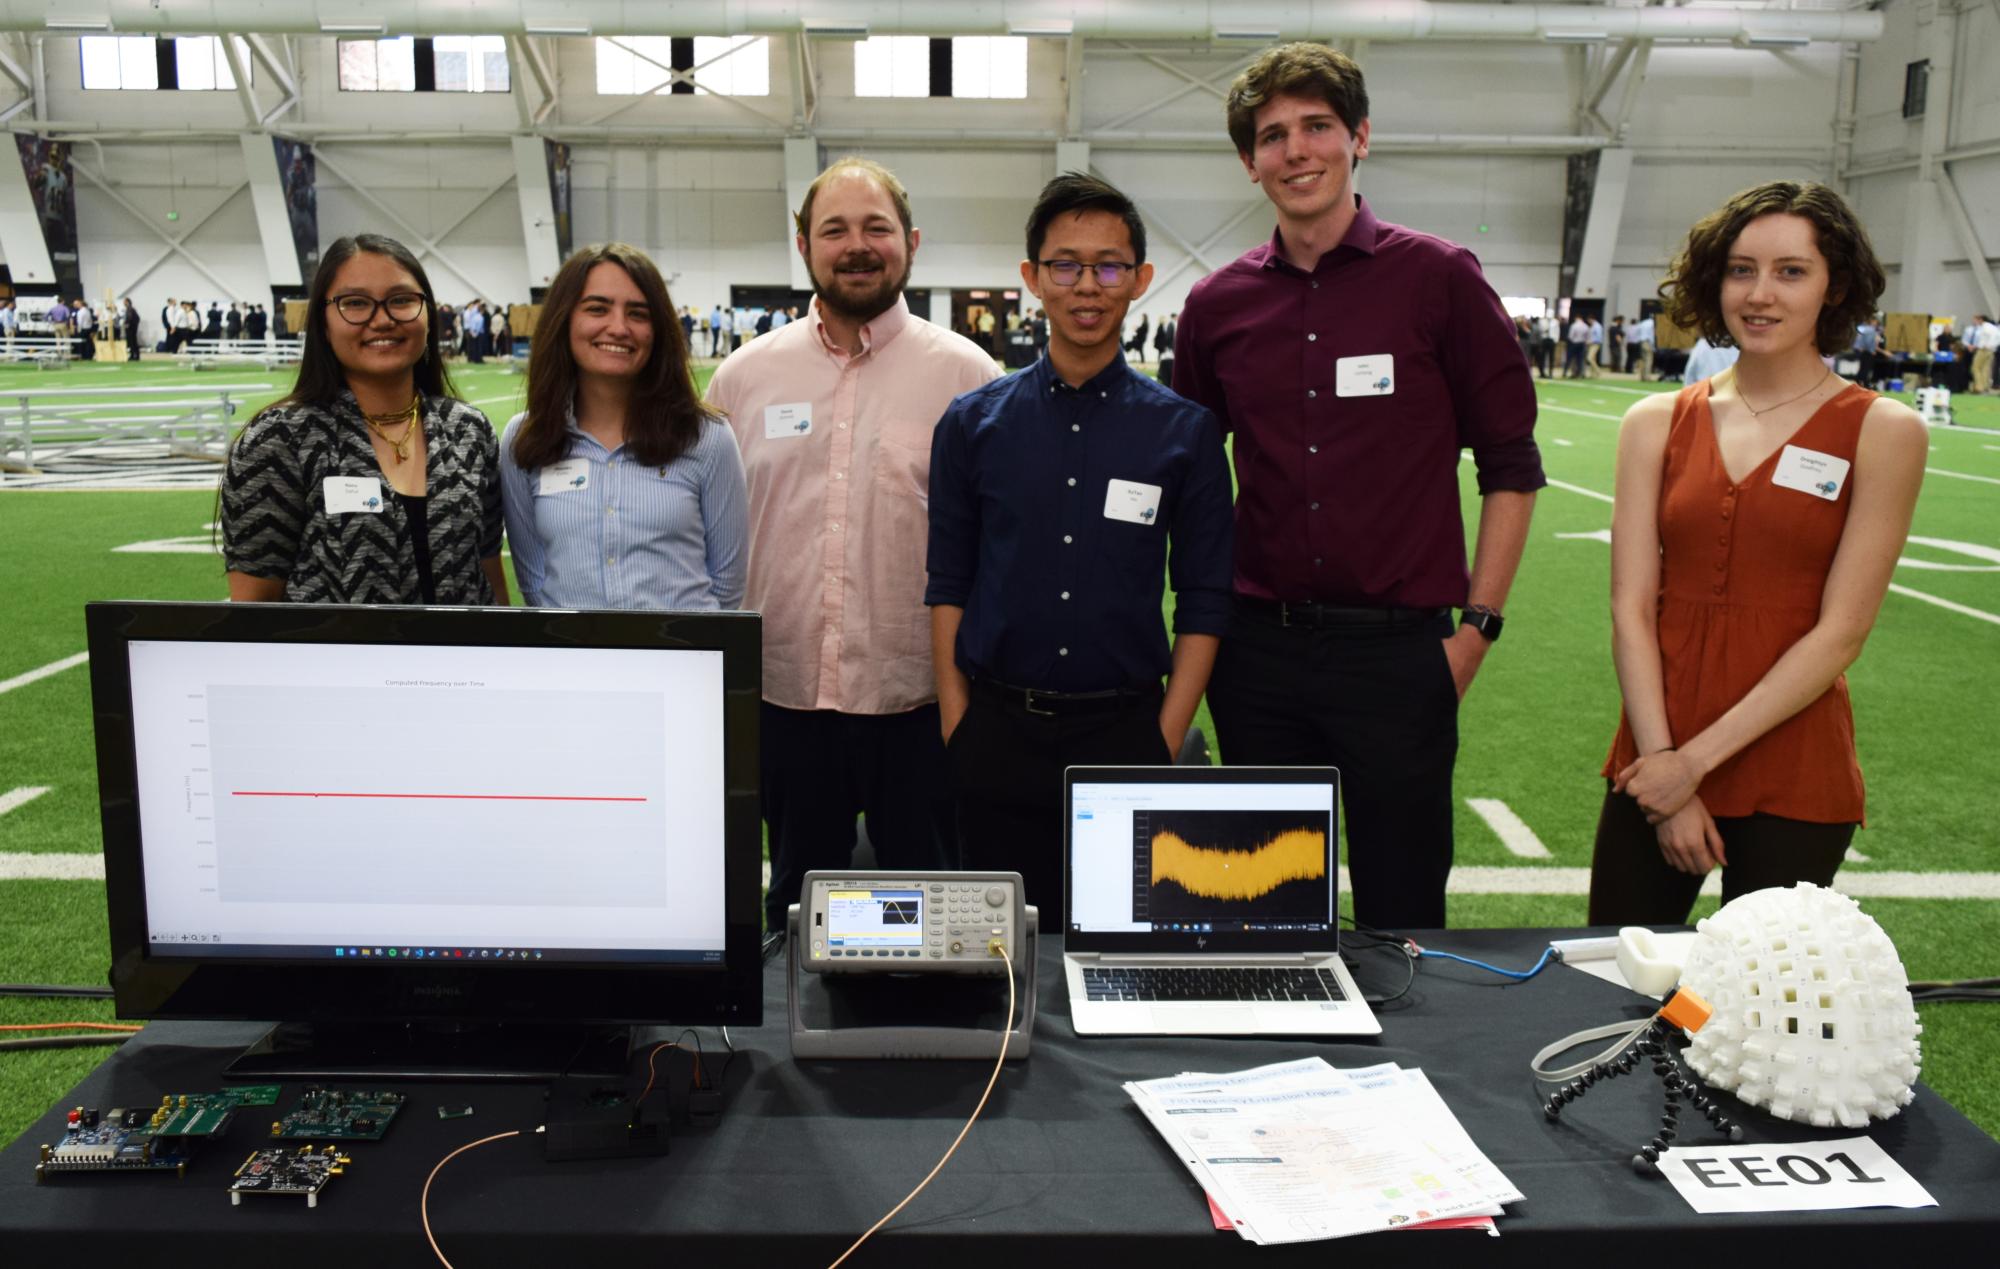 The six team members with their project at the Engineering Projects Expo